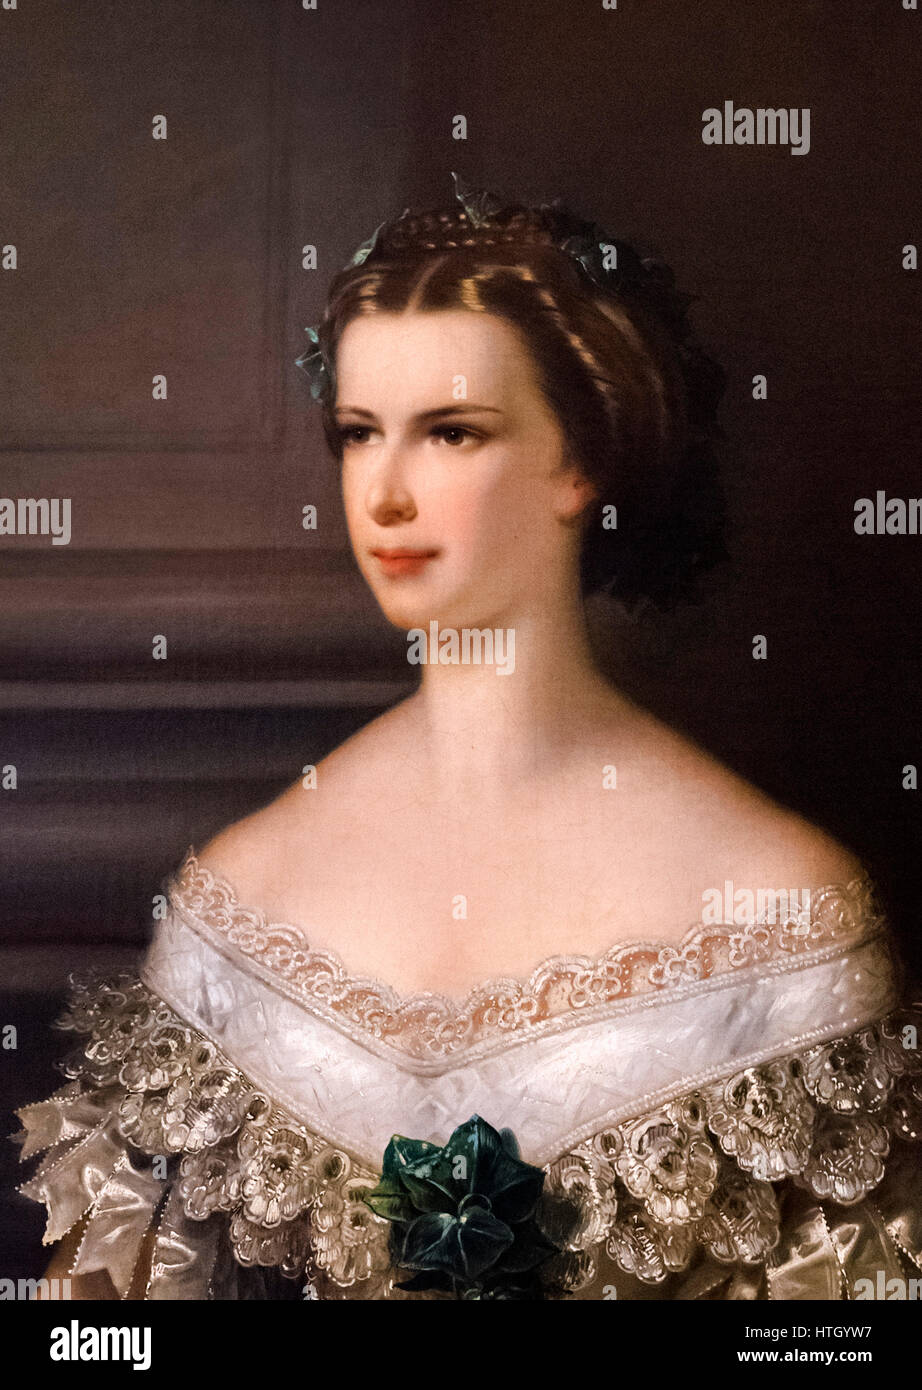 Sisi, portrait. Empress Elisabeth of Austria (1837-1898), known as Sisi, wife of Emperor Franz Joseph I. Painting by Franz Schrotzberg, oil on canvas, 1856. Detail of a larger painting, HTGYW6. Stock Photo